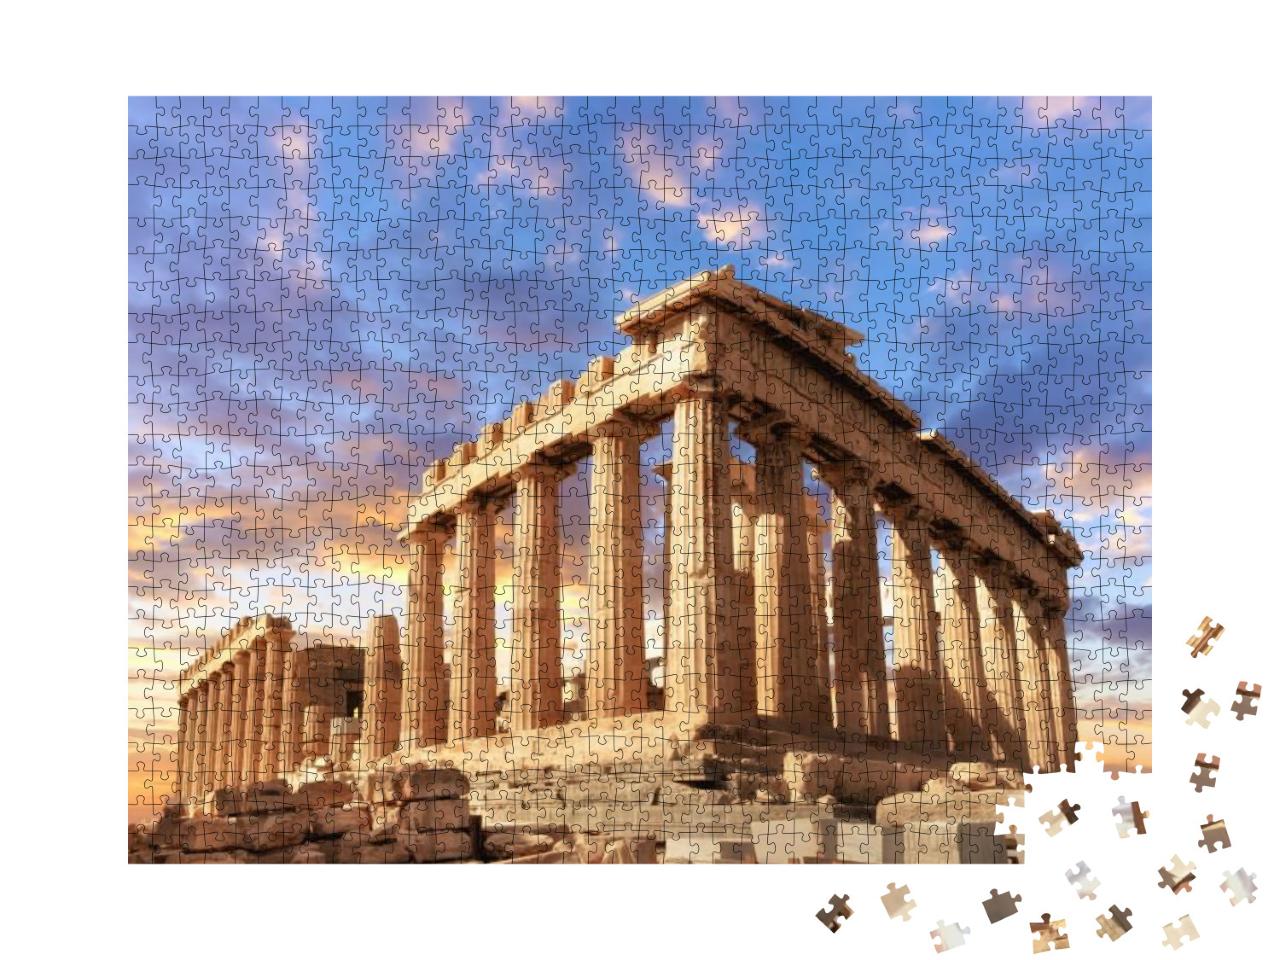 Parthenon Temple on a Sunset. Acropolis in Athens, Greece... Jigsaw Puzzle with 1000 pieces